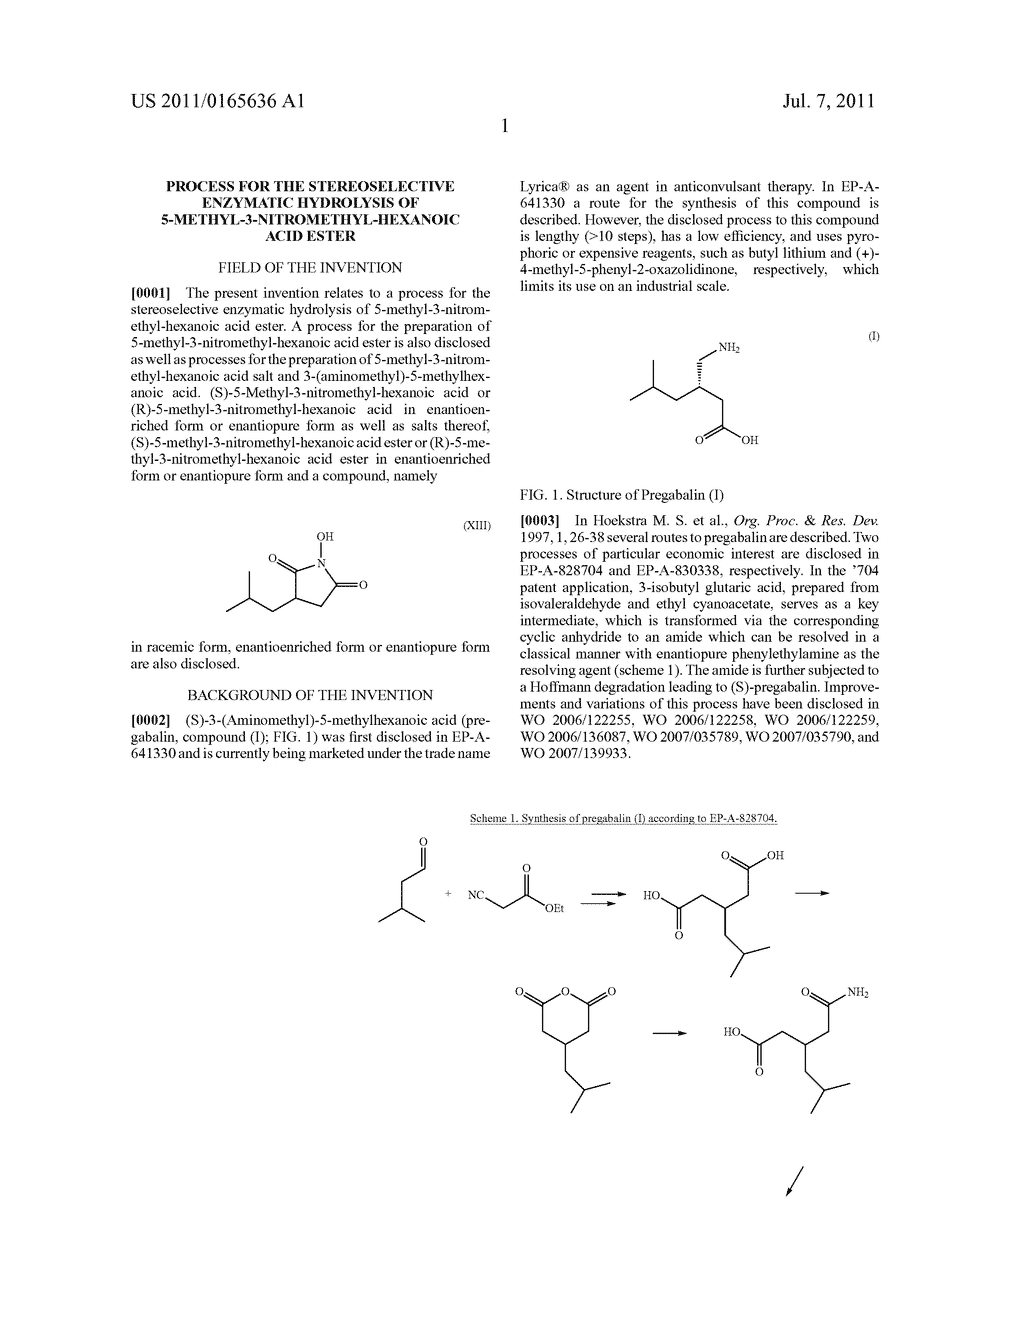 PROCESS FOR THE STEREOSELECTIVE ENZYMATIC HYDROLYSIS OF     5-METHYL-3-NITROMETHYL-HEXANOIC ACID ESTER - diagram, schematic, and image 02